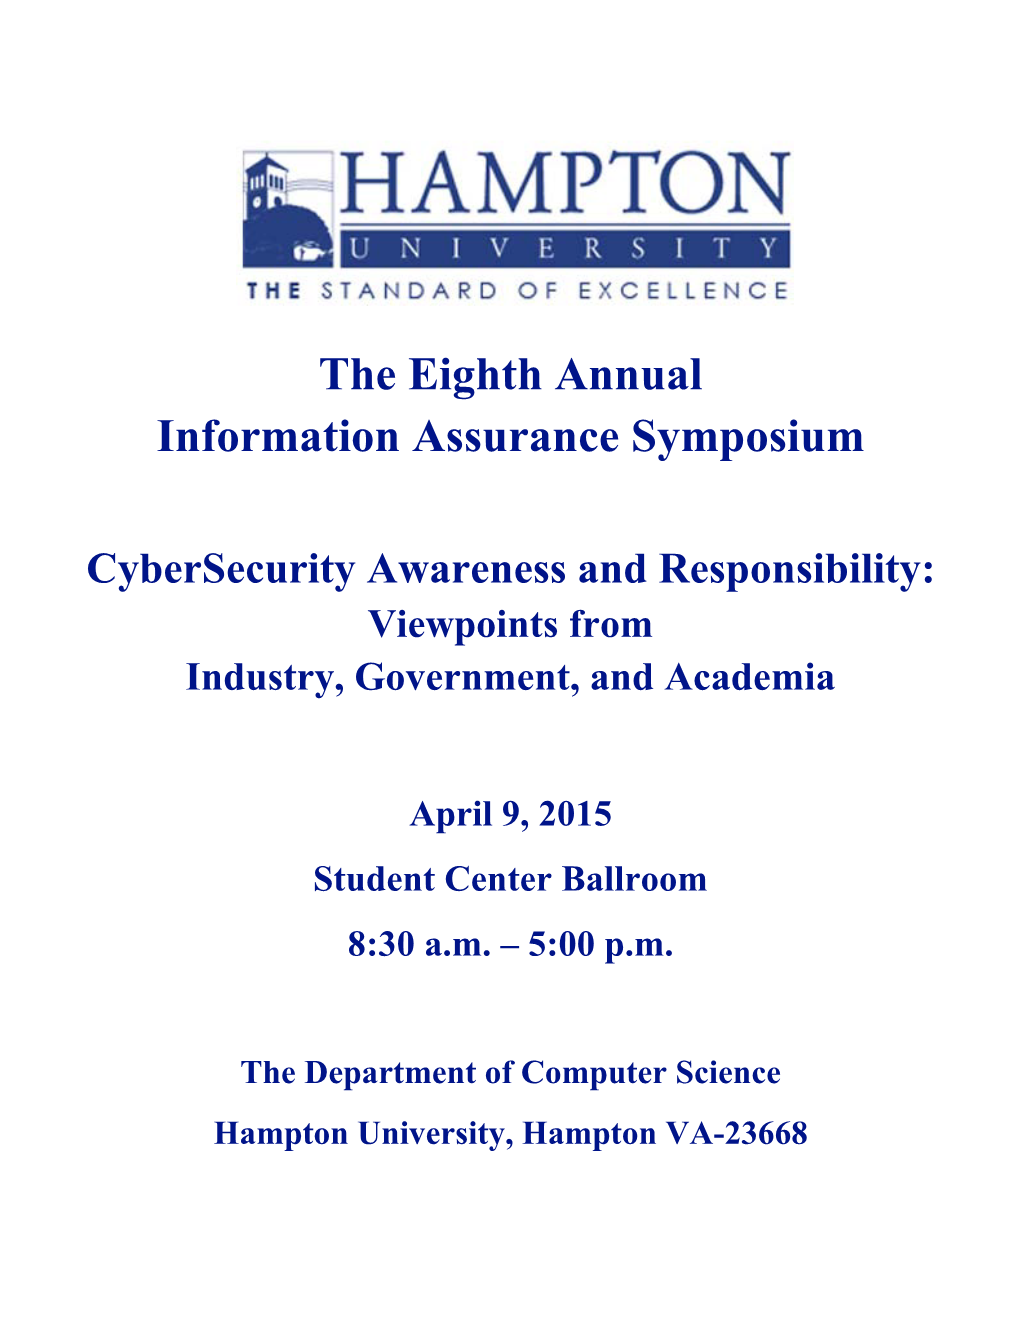 The Eighth Annual Information Assurance Symposium